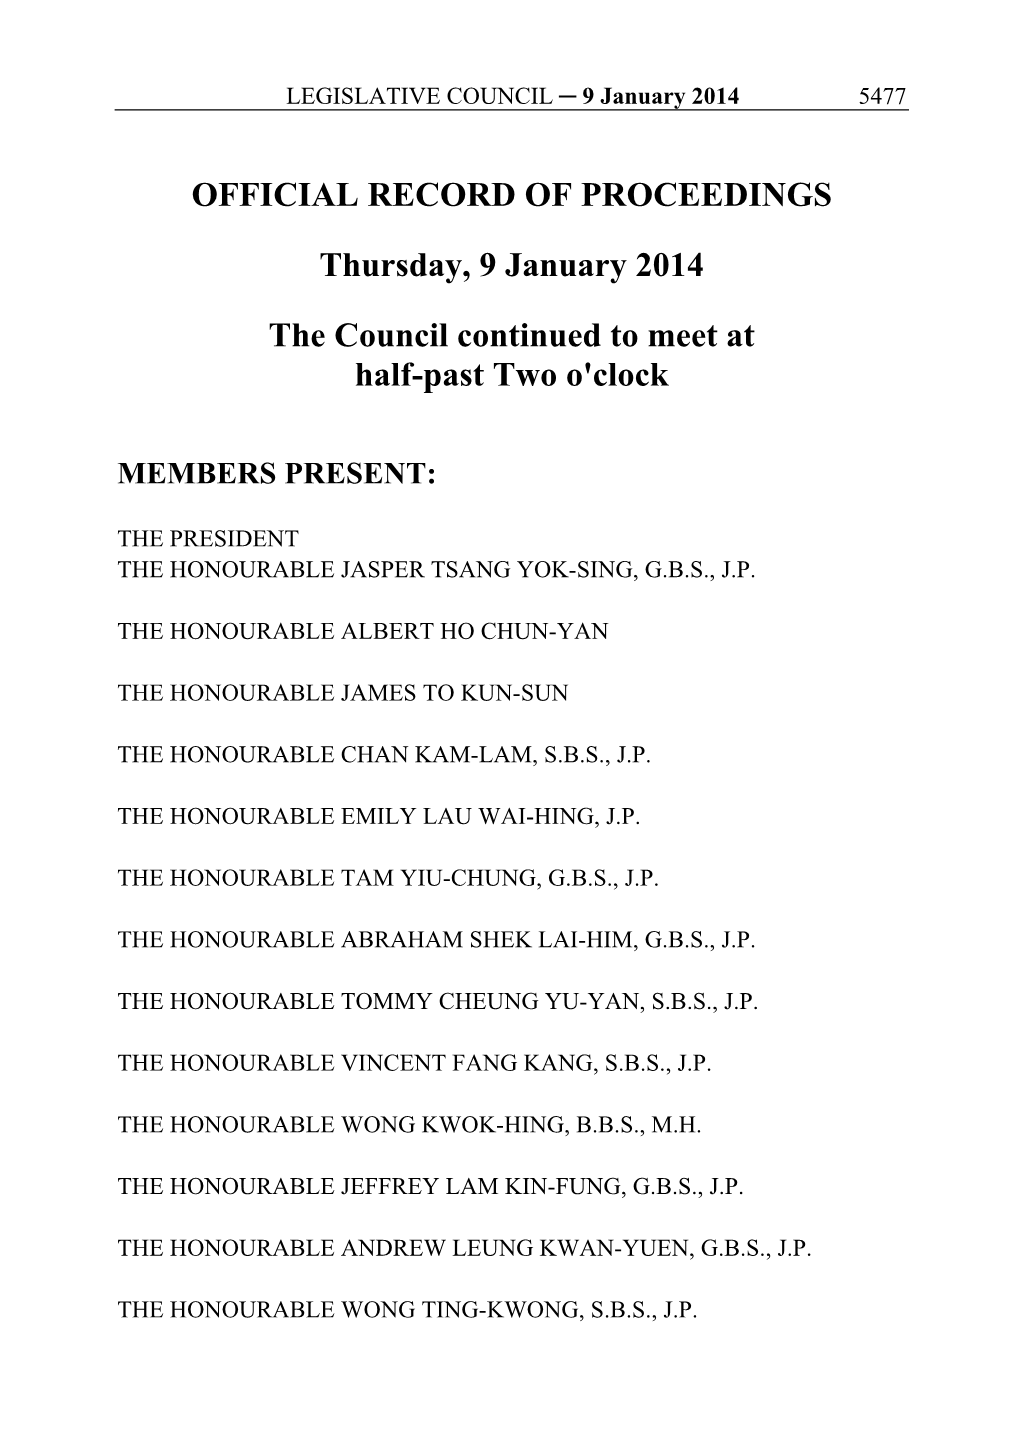 OFFICIAL RECORD of PROCEEDINGS Thursday, 9 January 2014 the Council Continued to Meet at Half-Past Two O'clock